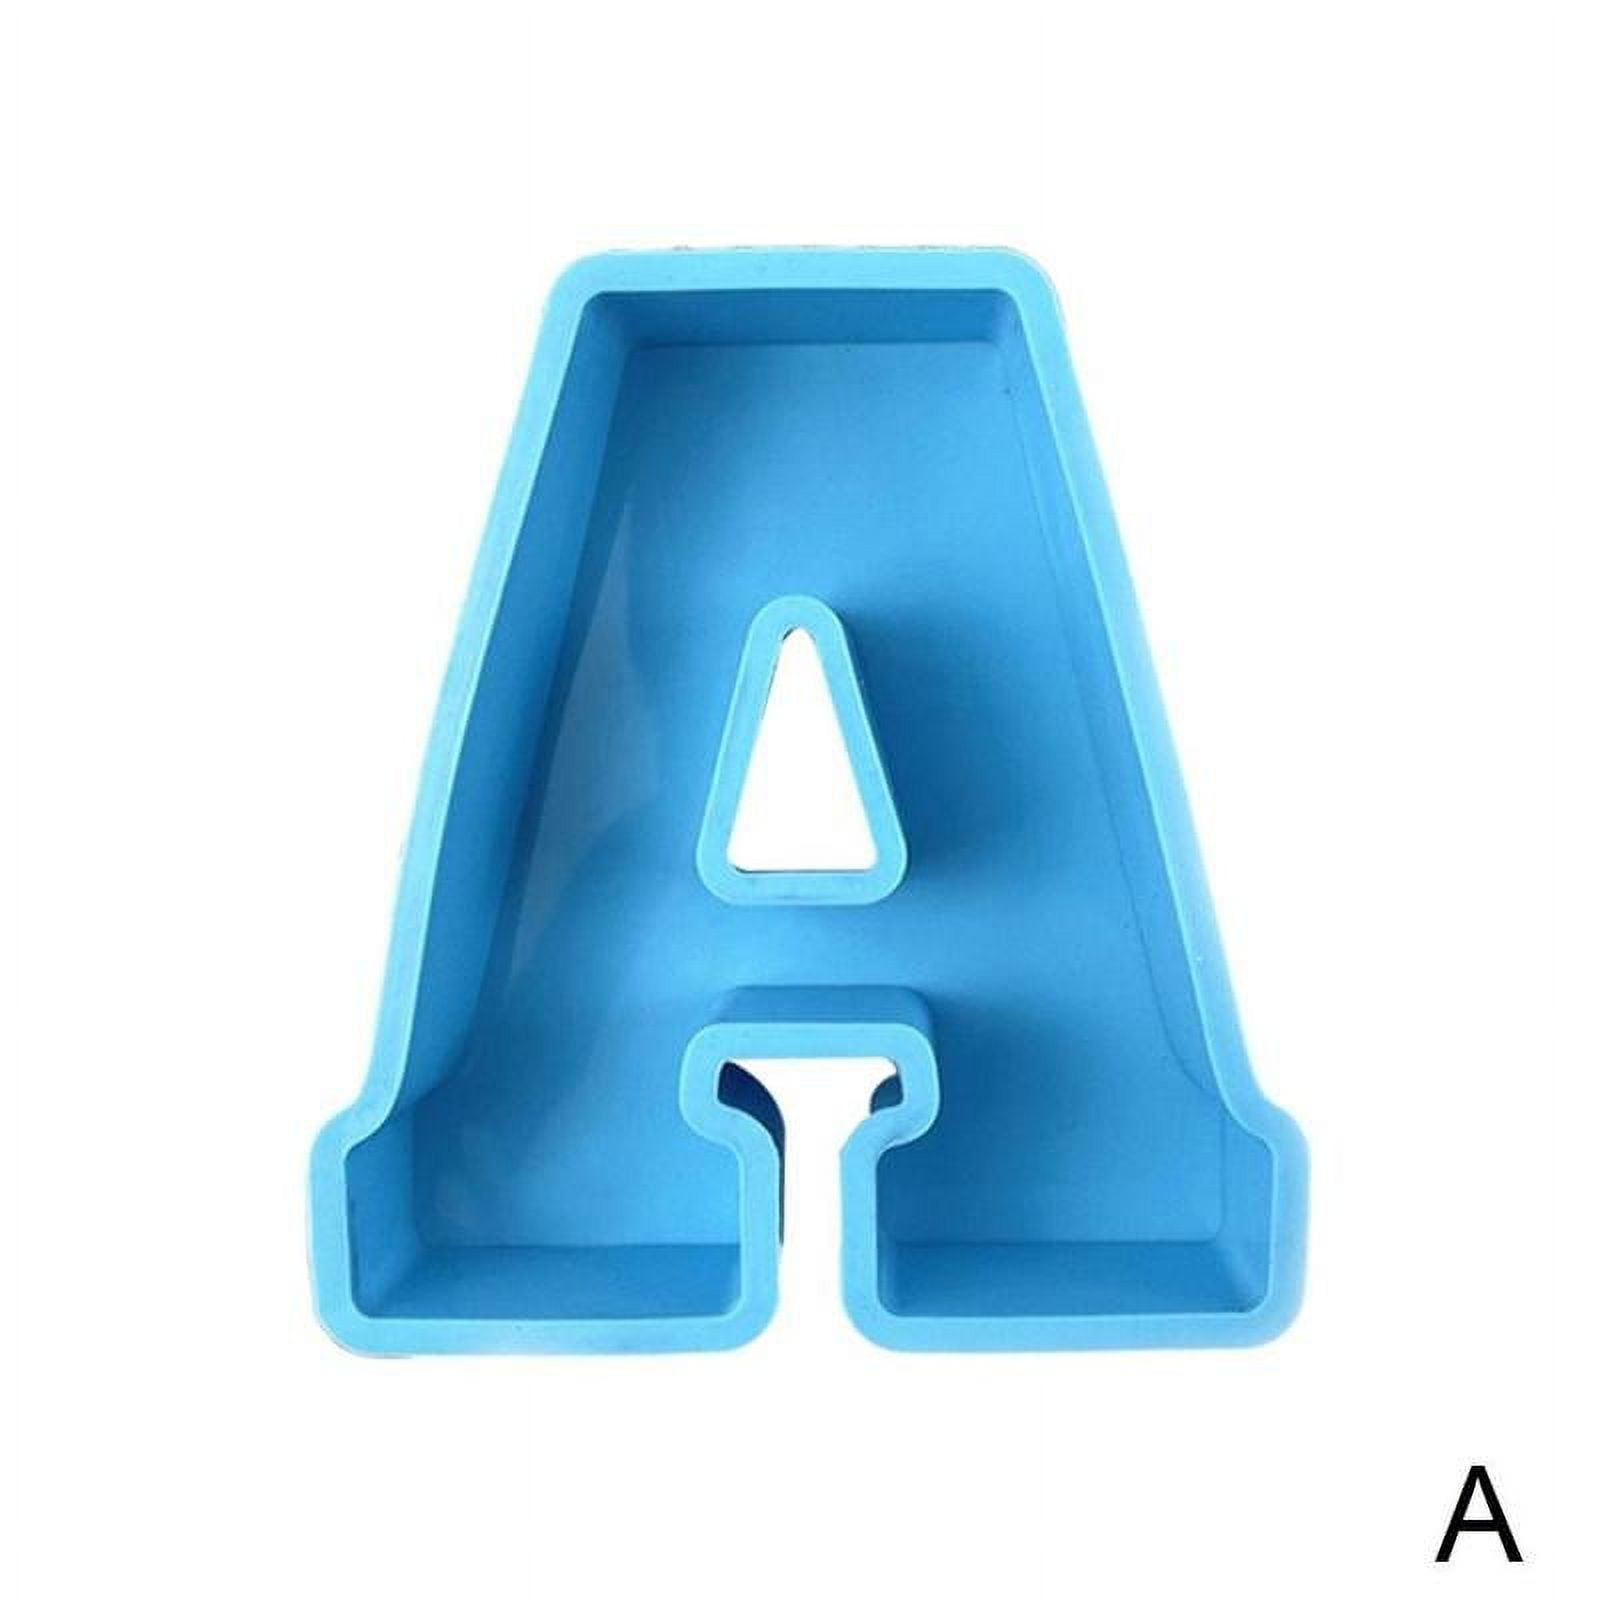 A To Z Large Letter Molds Resin 3D Alphabet Silicone Molds Epoxy Resin Art  Big Capital Letter Resin Mold - Silicone Molds Wholesale & Retail -  Fondant, Soap, Candy, DIY Cake Molds